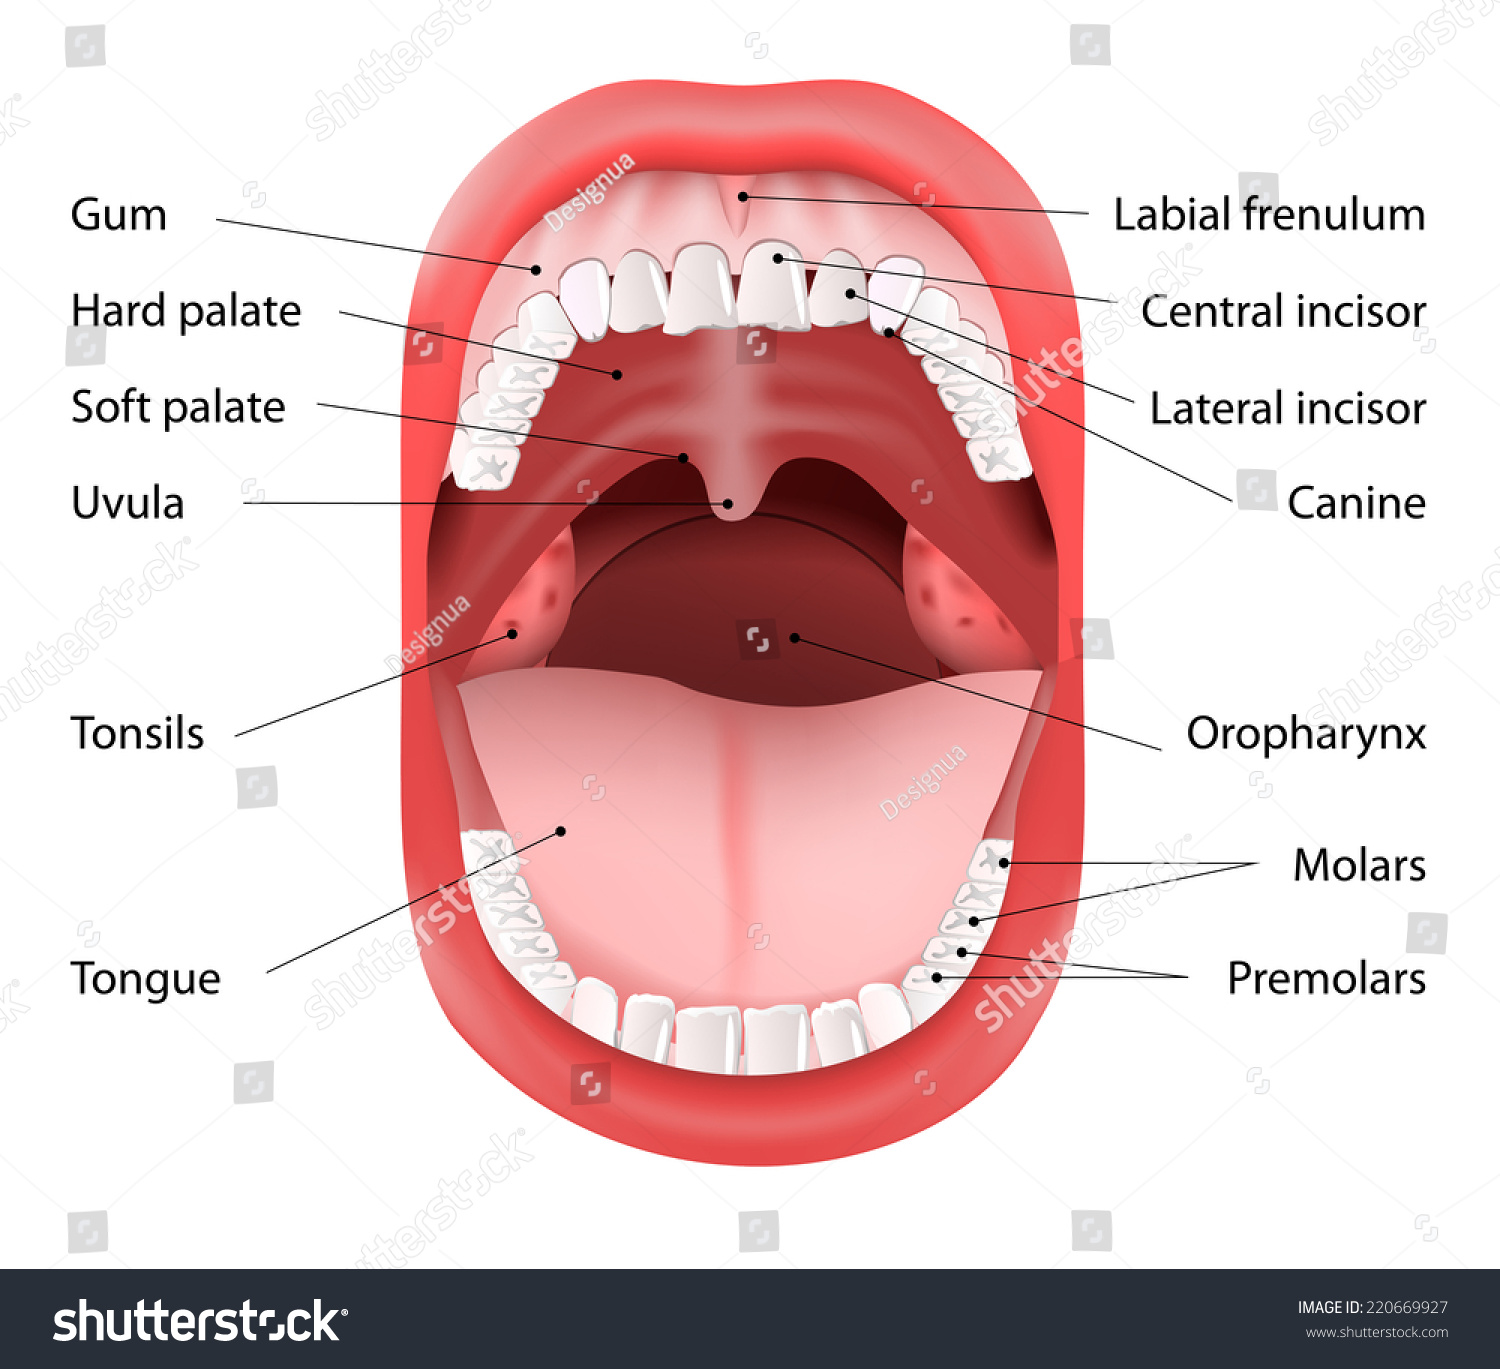 Teeth In The Human Mouth 83